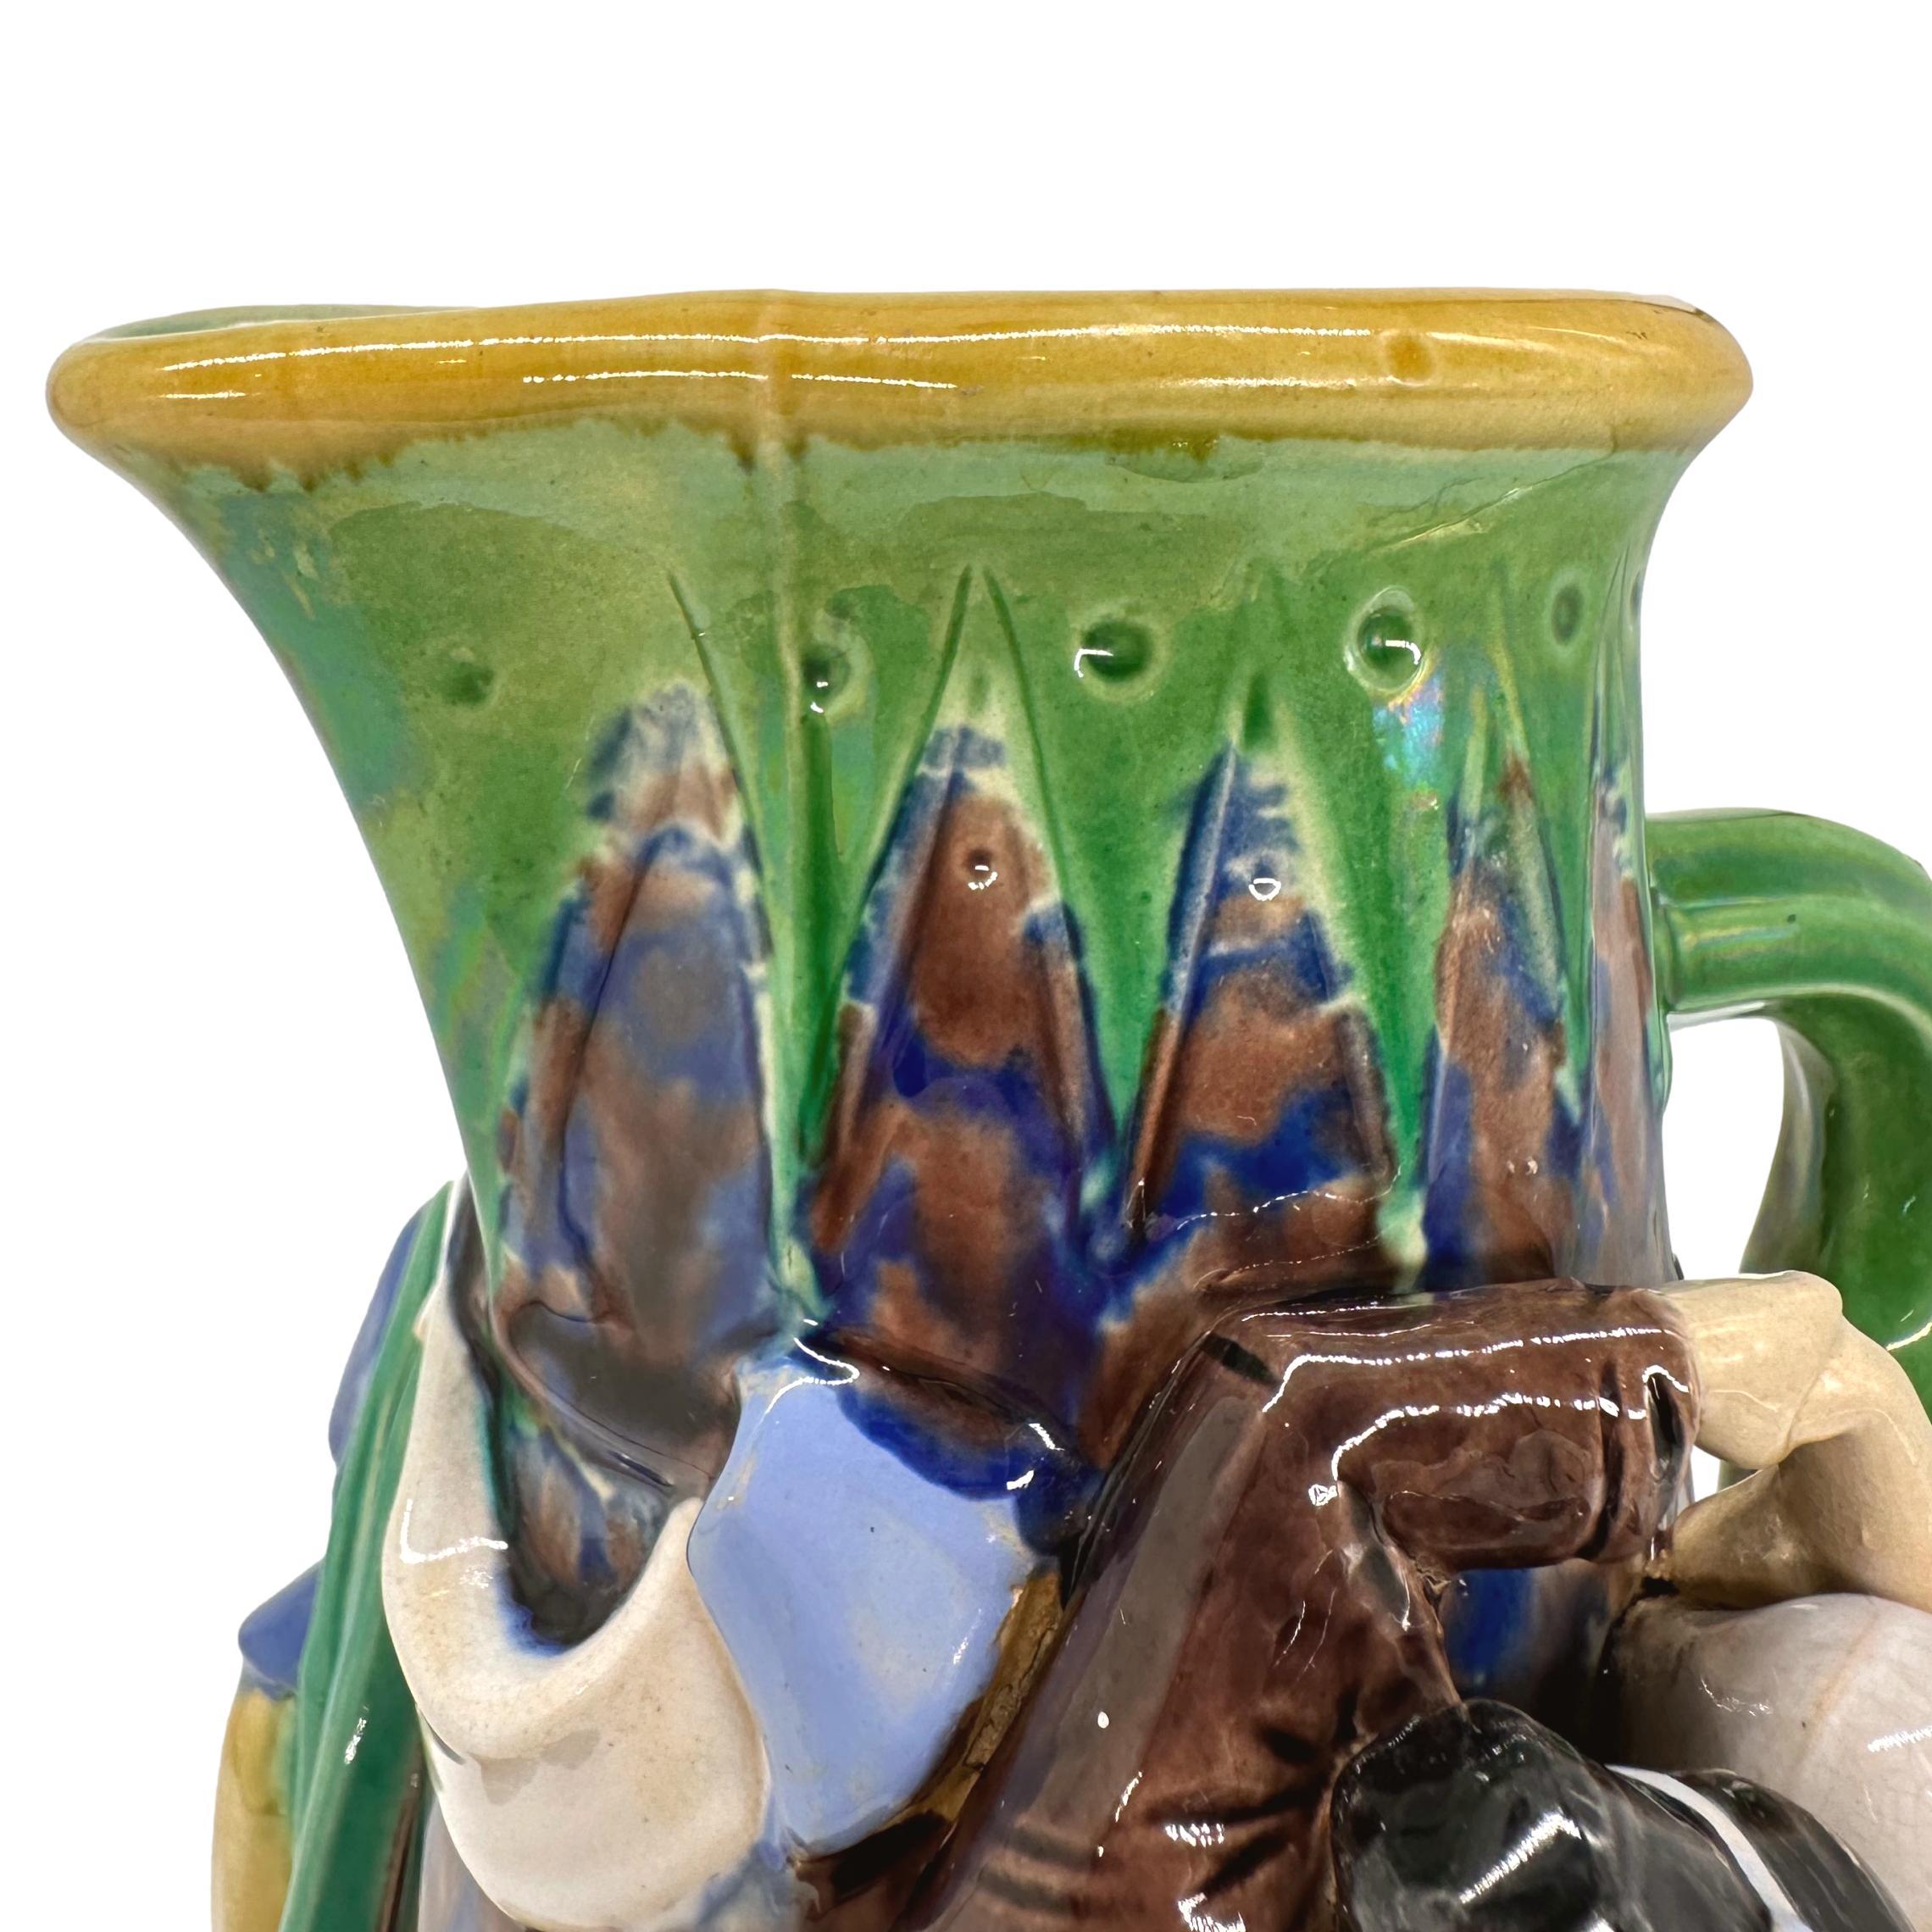 A Minton Majolica Ale Jug with Five Revelers in Medieval Dress, dated 1862 For Sale 7